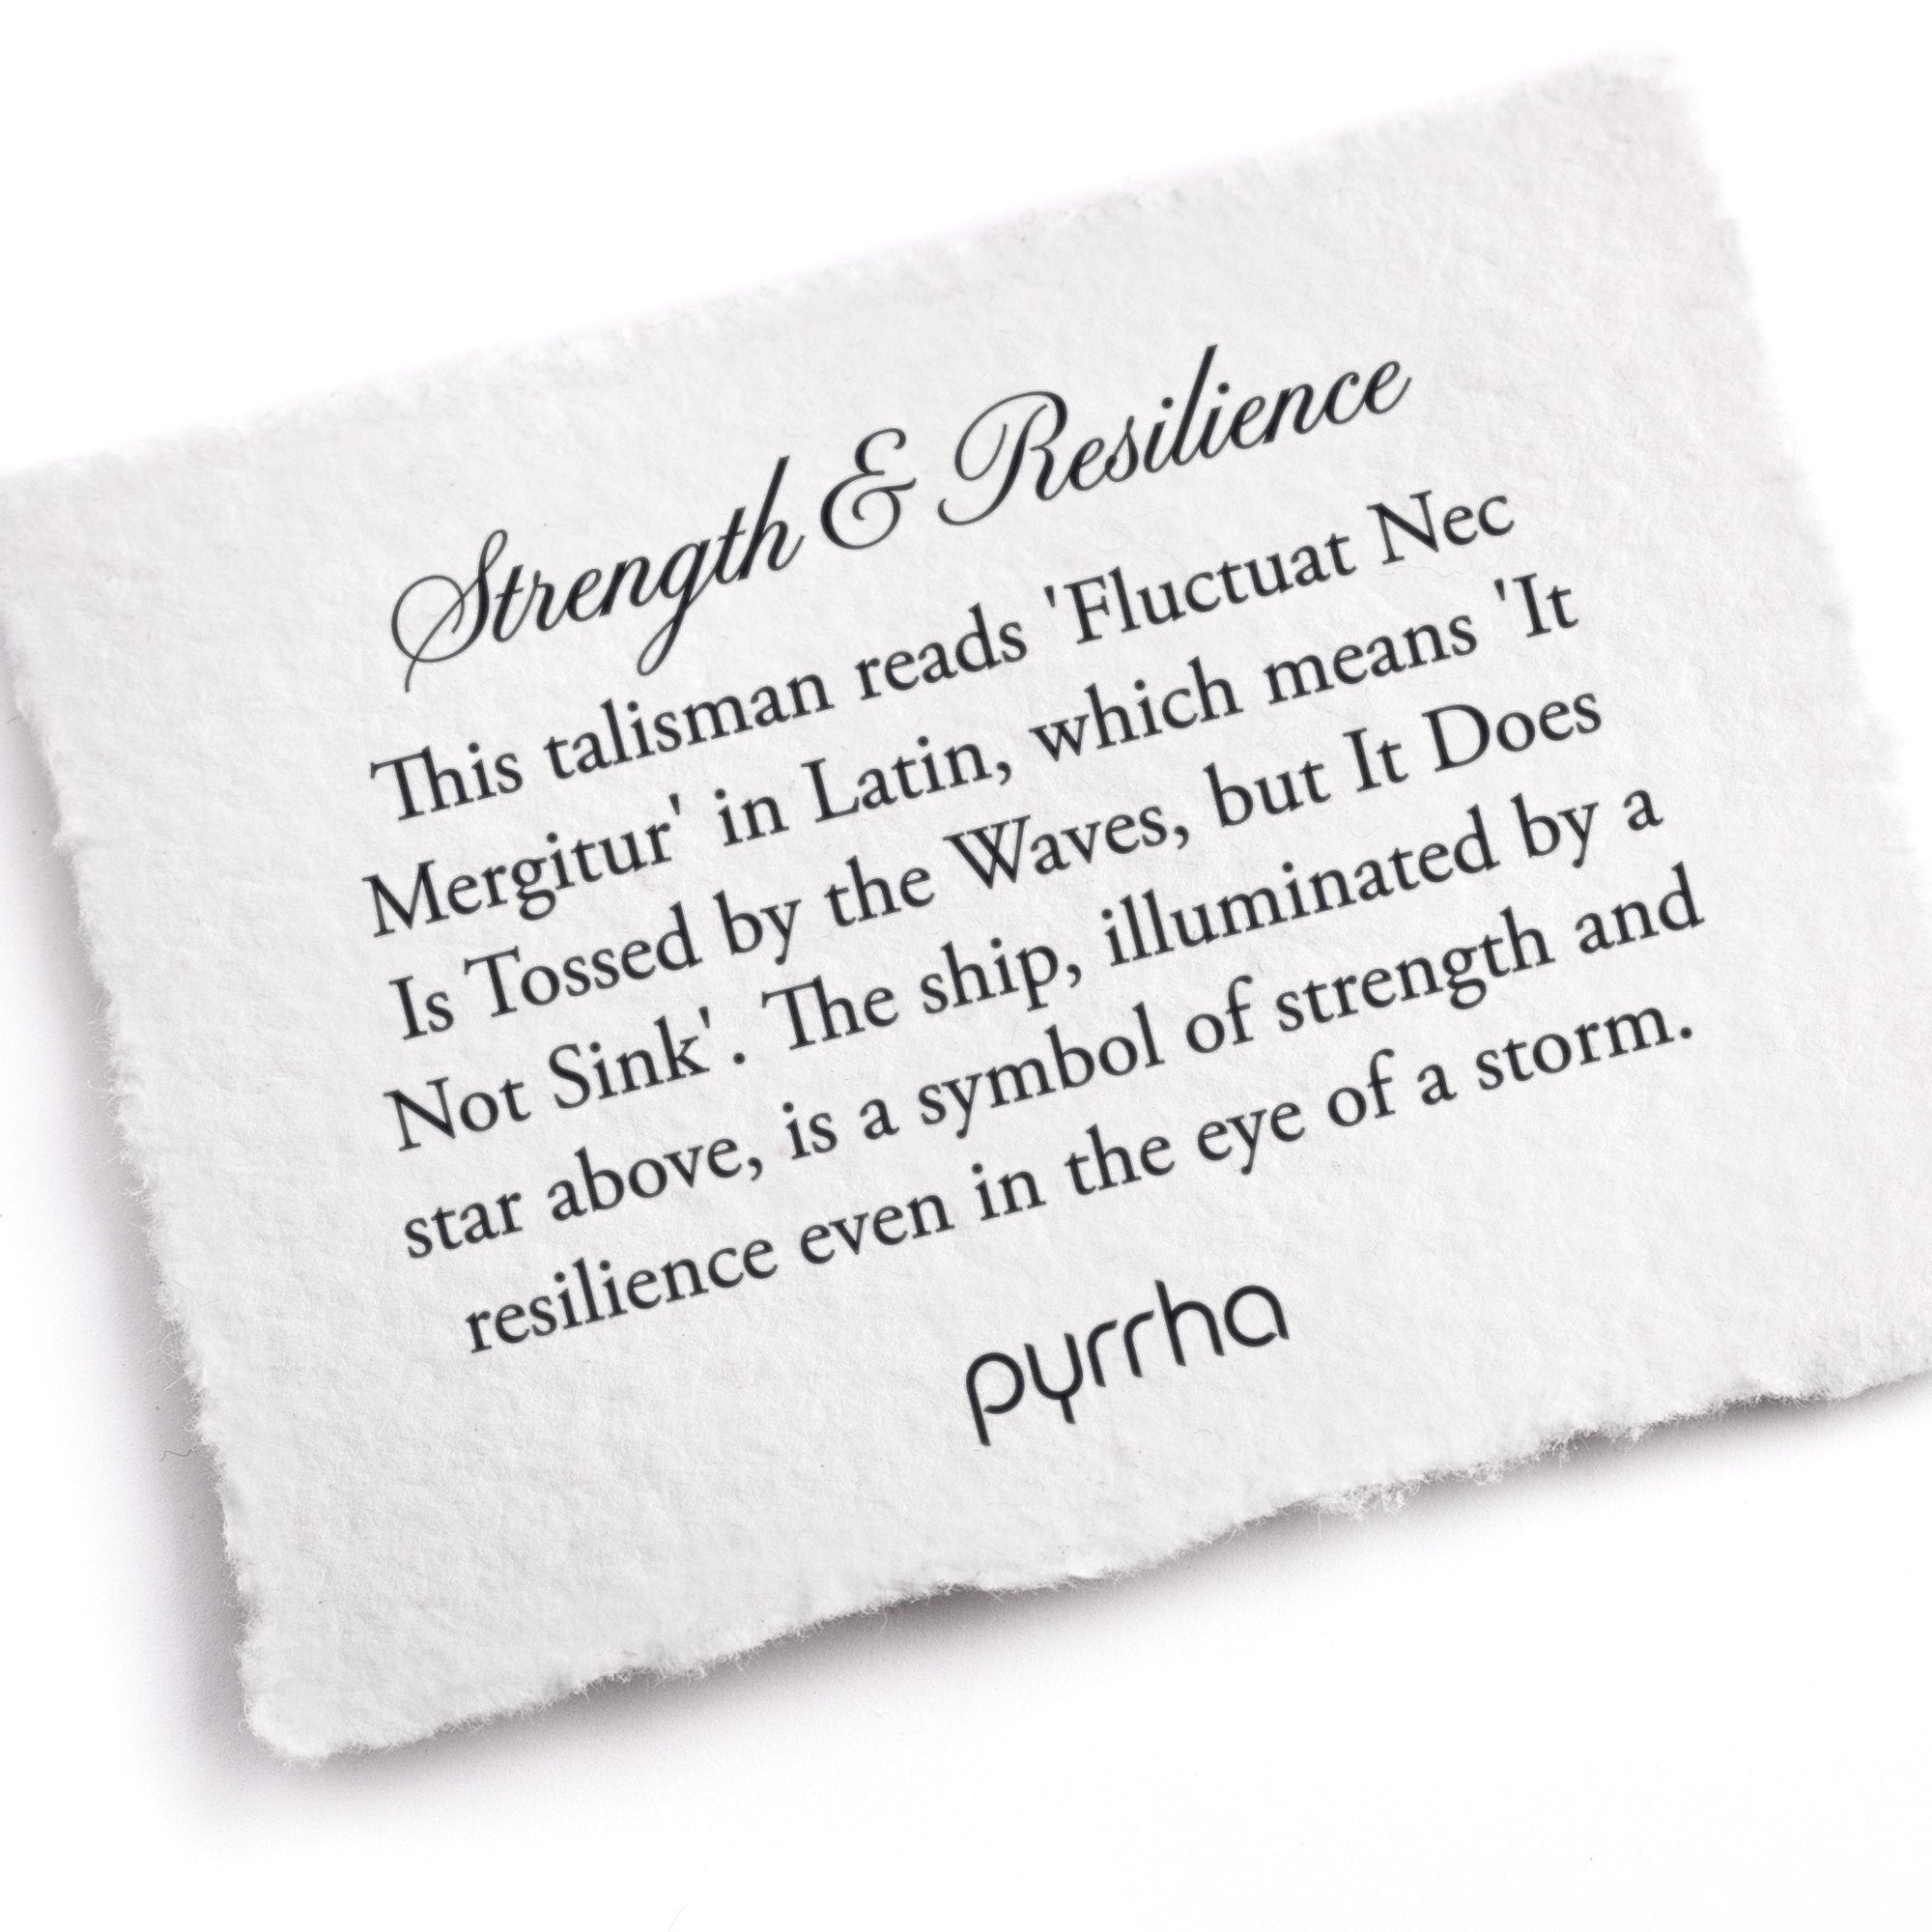 Strength and Resilience Talisman Meaning Card